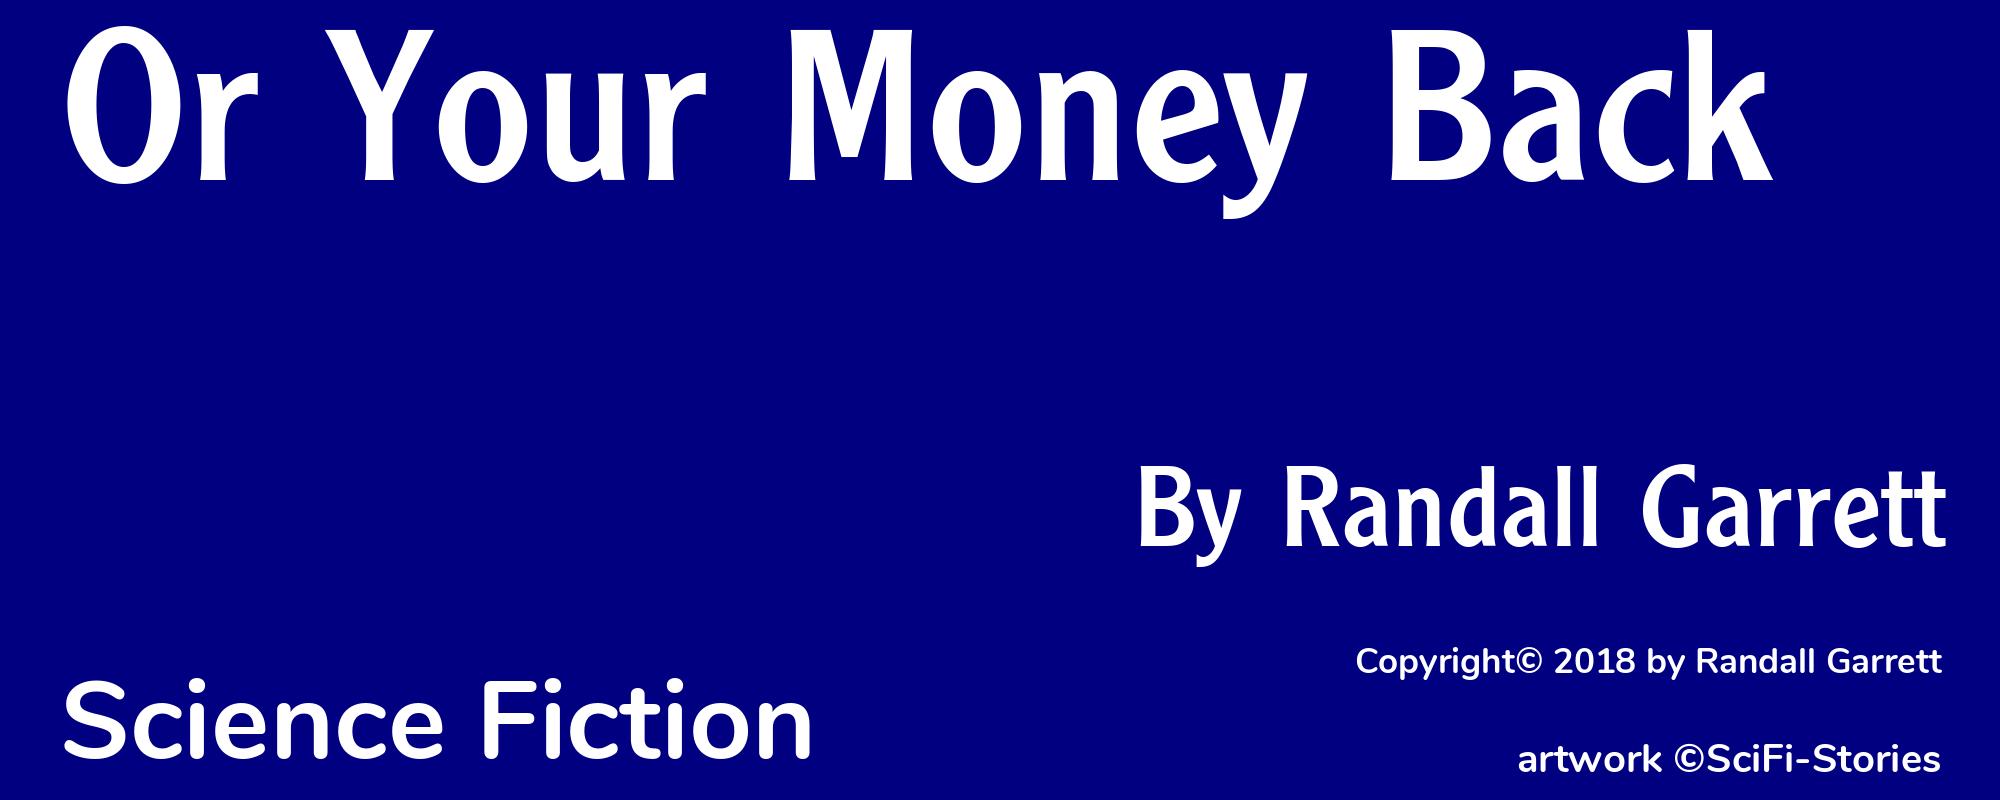 Or Your Money Back - Cover